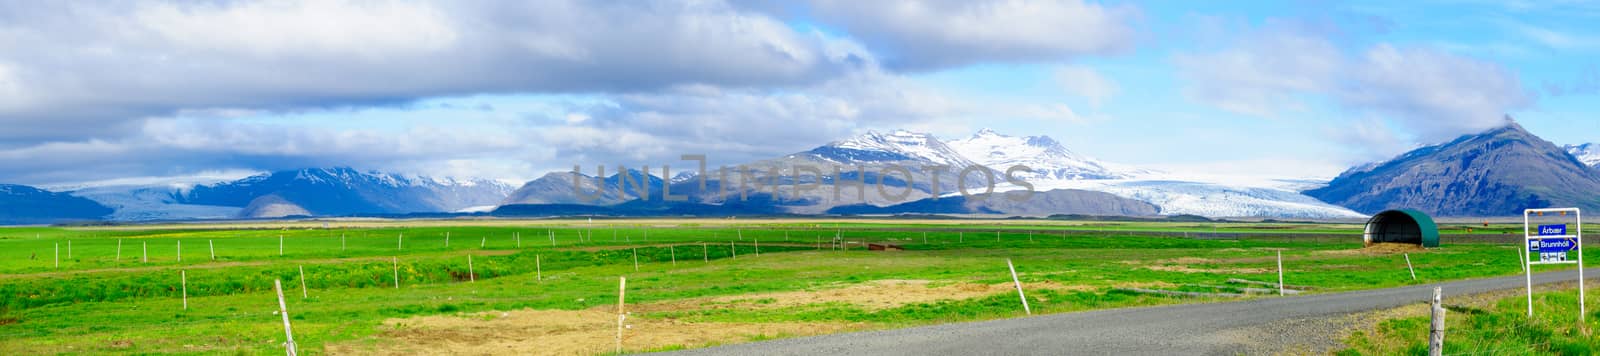 Countryside and glacier view in Iceland by RnDmS